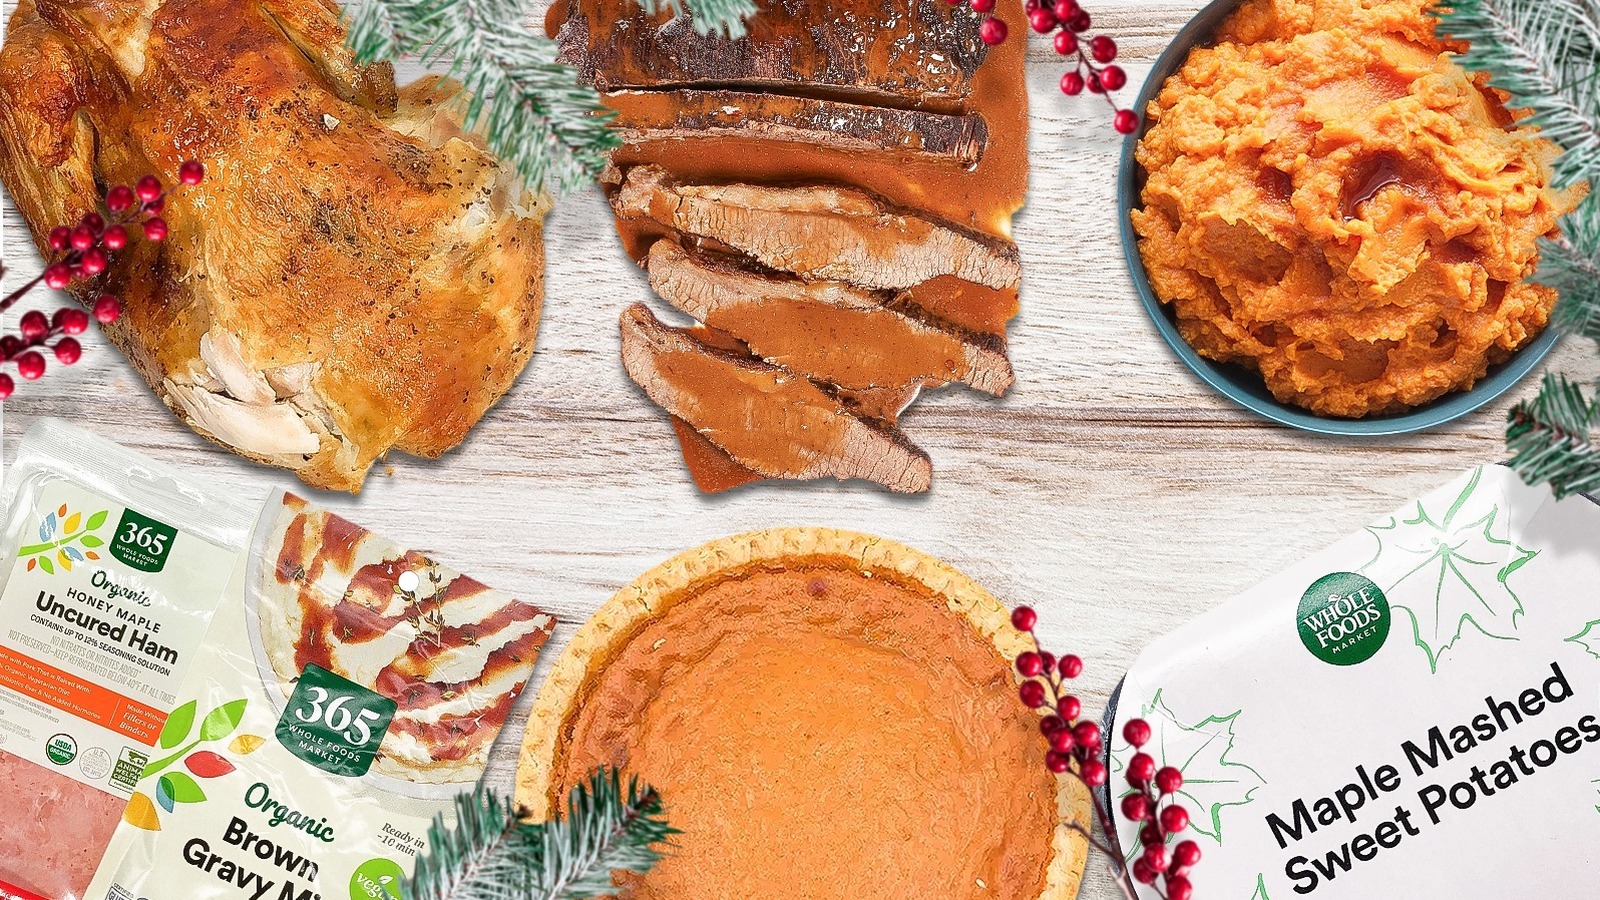 https://www.tastingtable.com/img/gallery/14-whole-foods-items-to-add-to-your-christmas-dinner/l-intro-1699900109.jpg